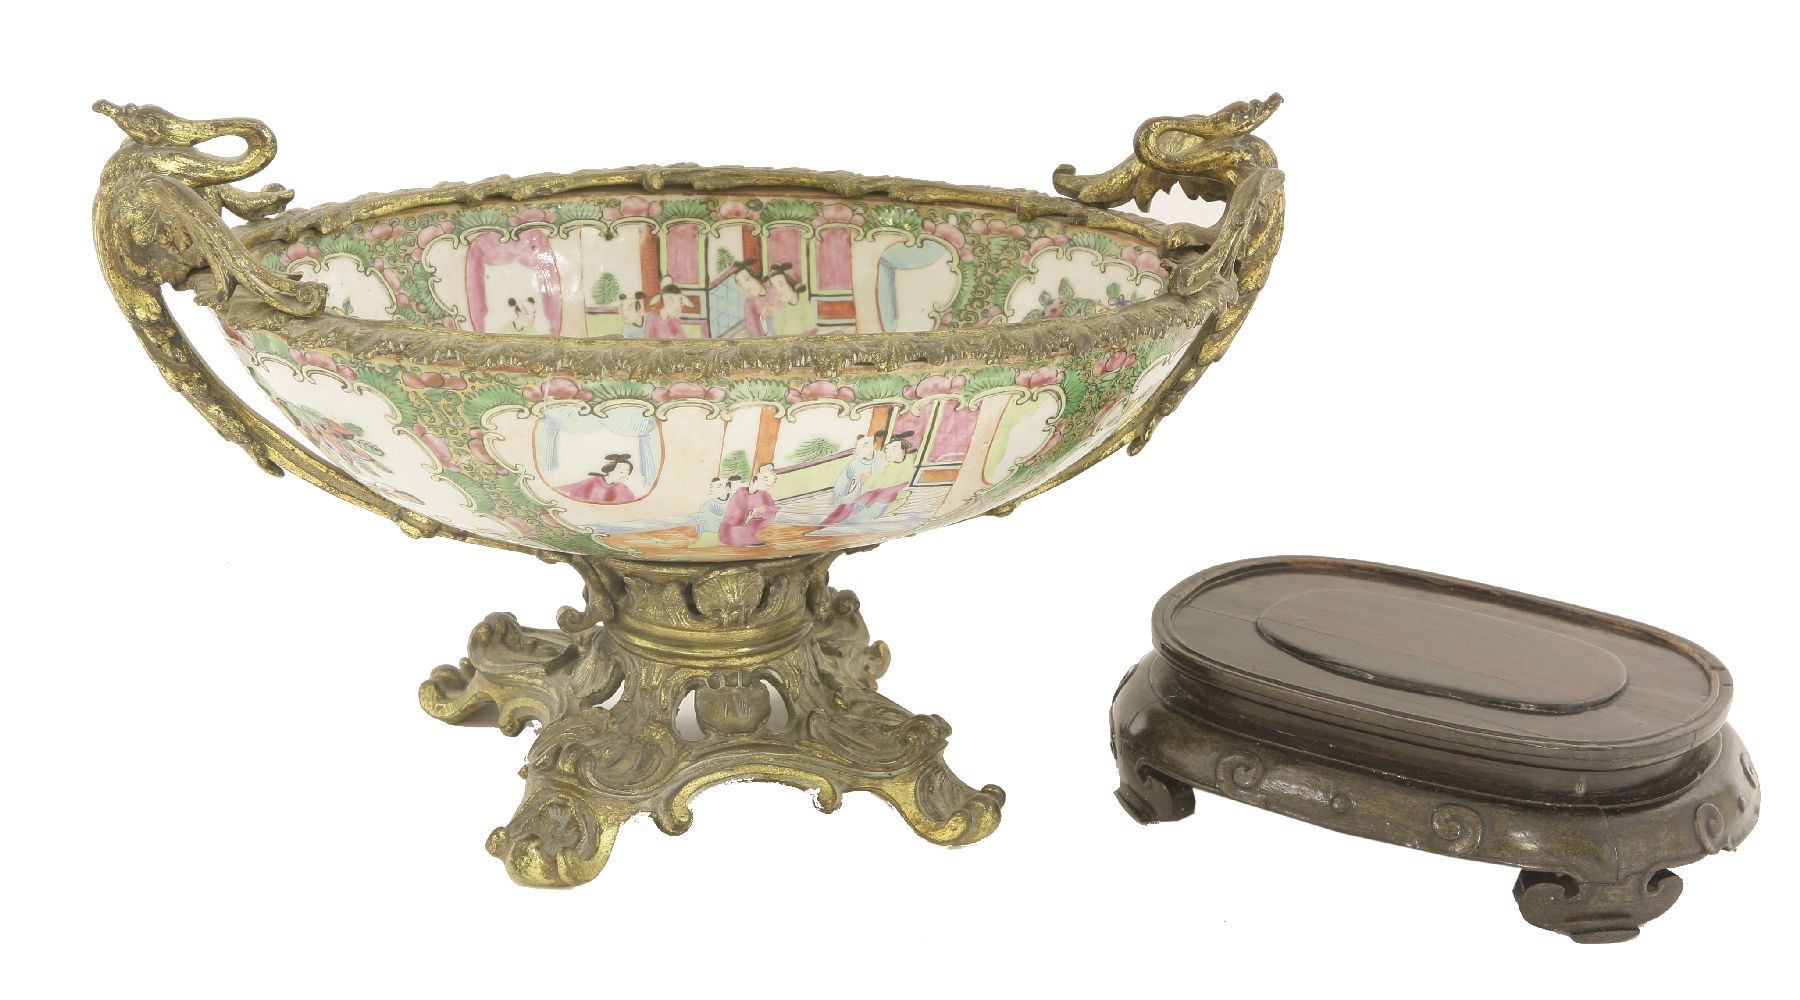 A Canton porcelain and ormolu centrepiece,late 19th century, brightly decorated, the mounts cast